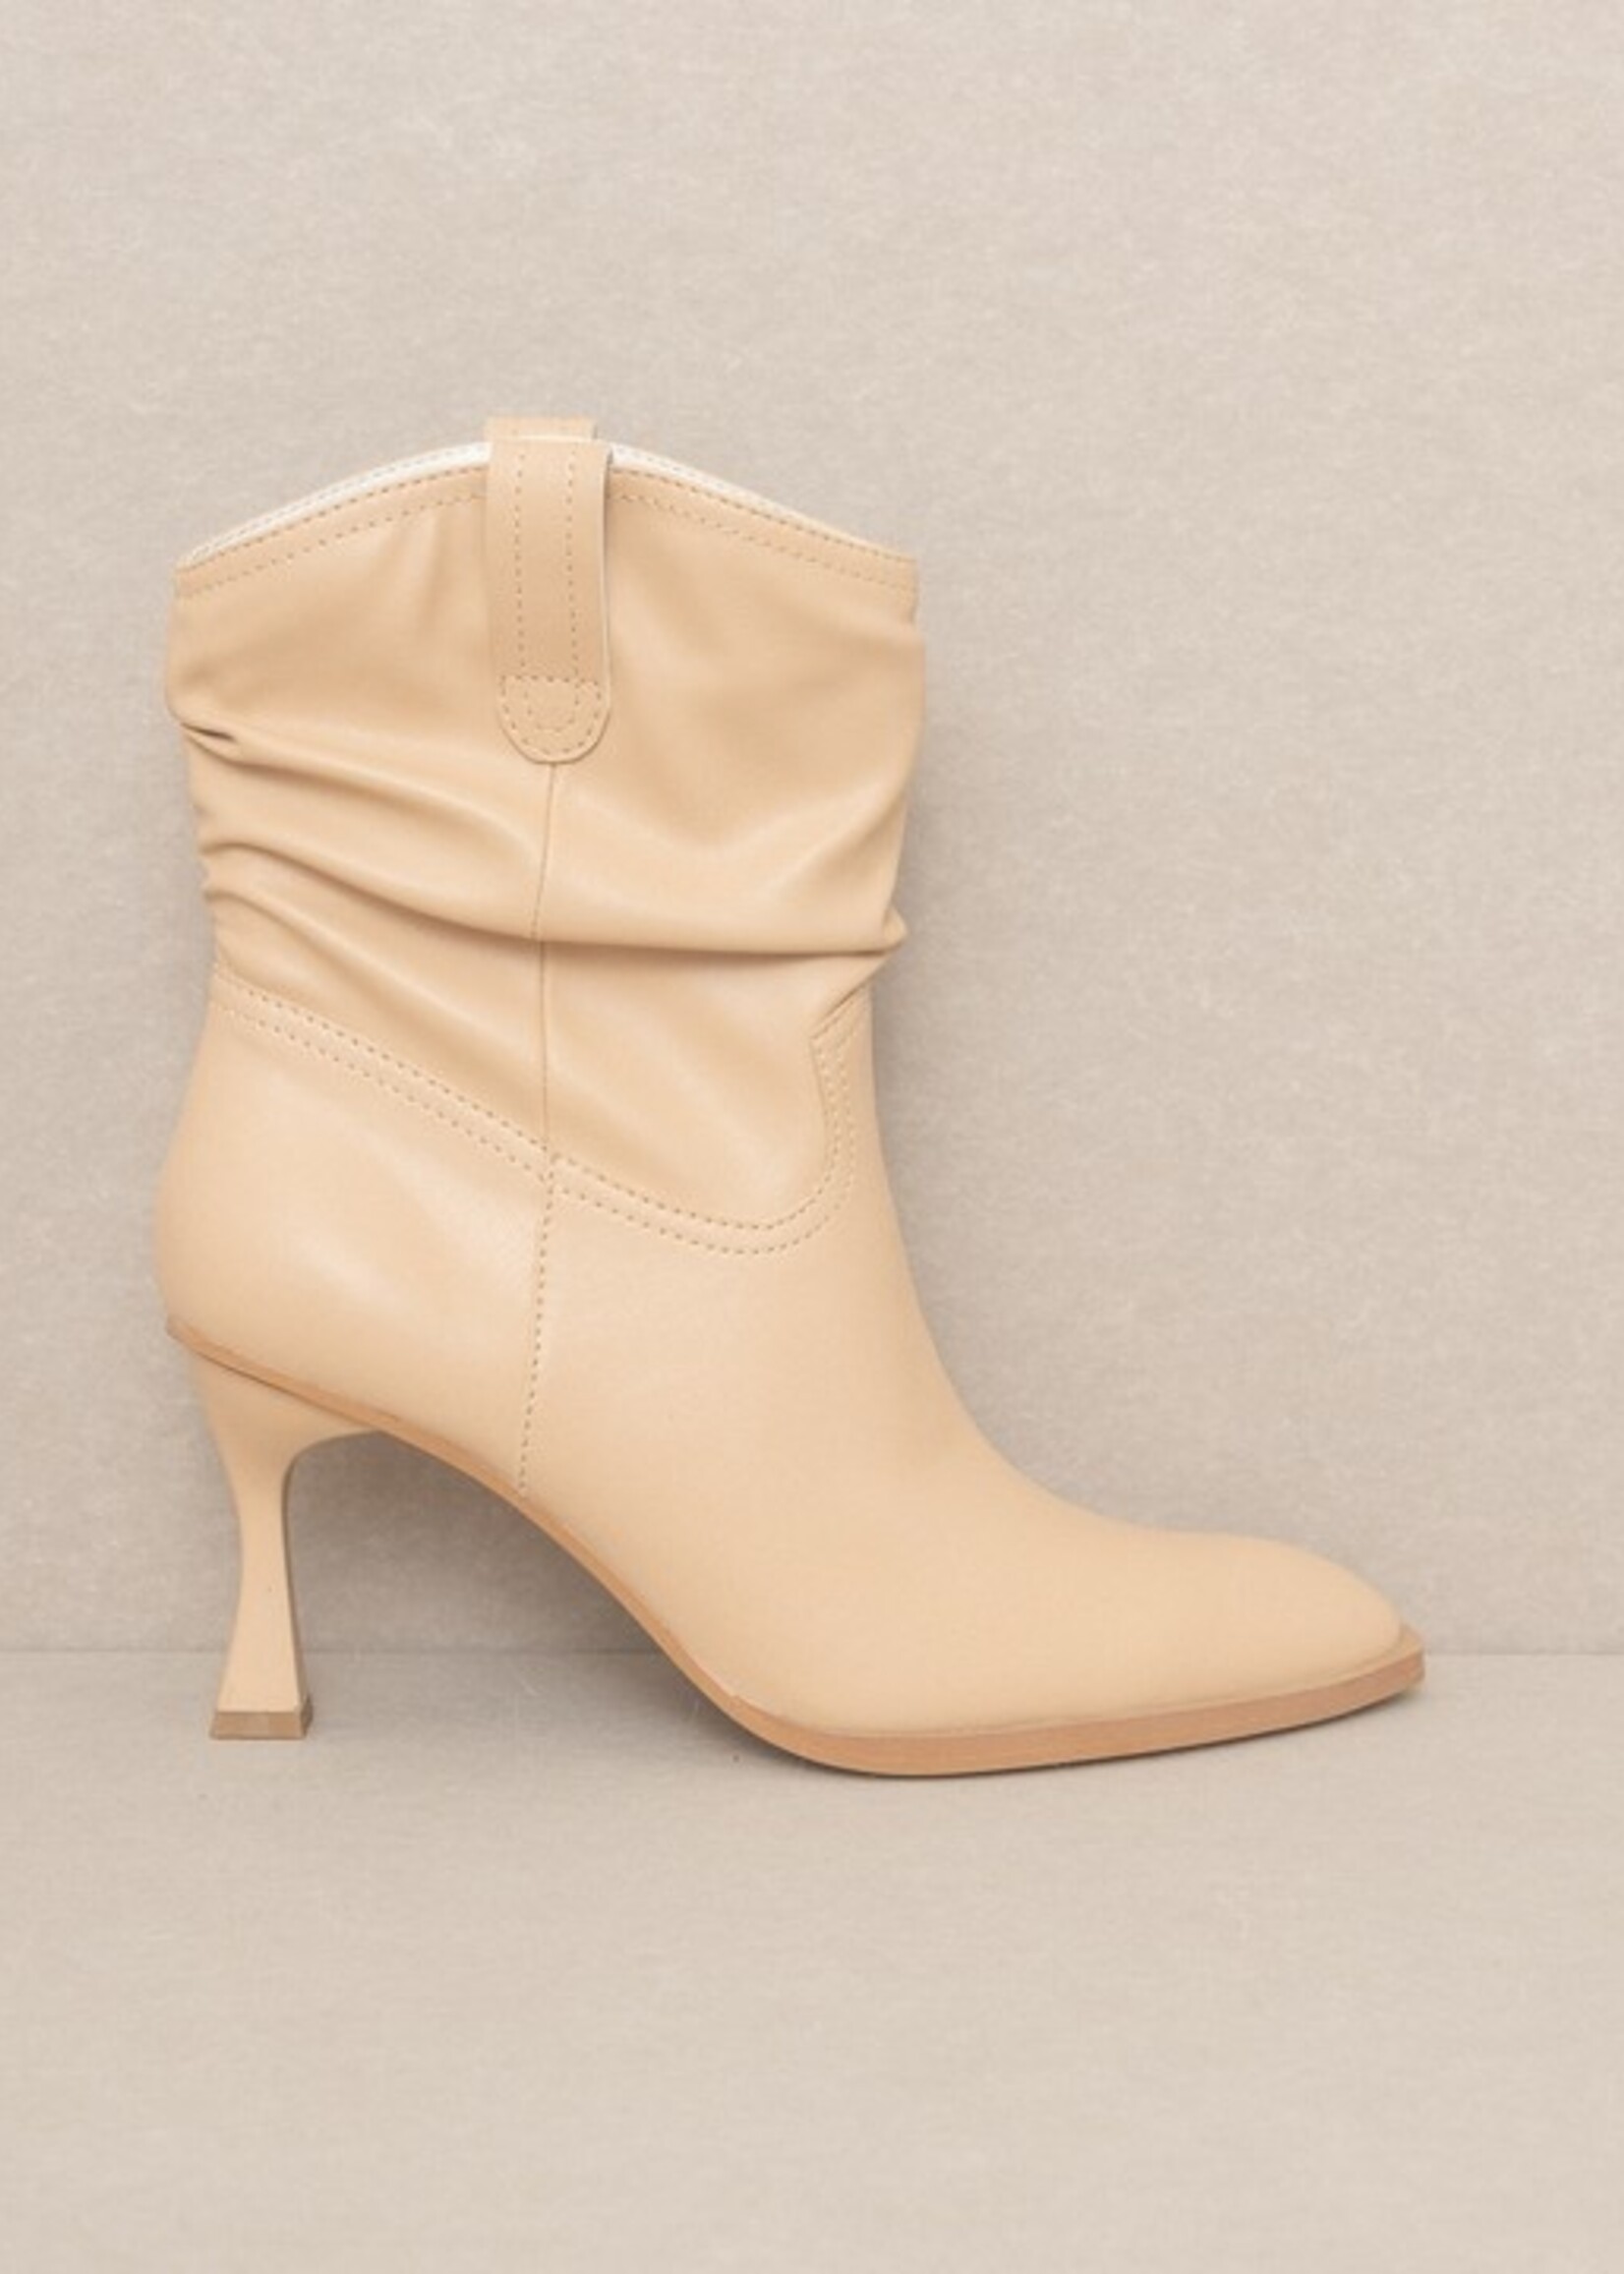 Western slouch bootie Riga+2 colors